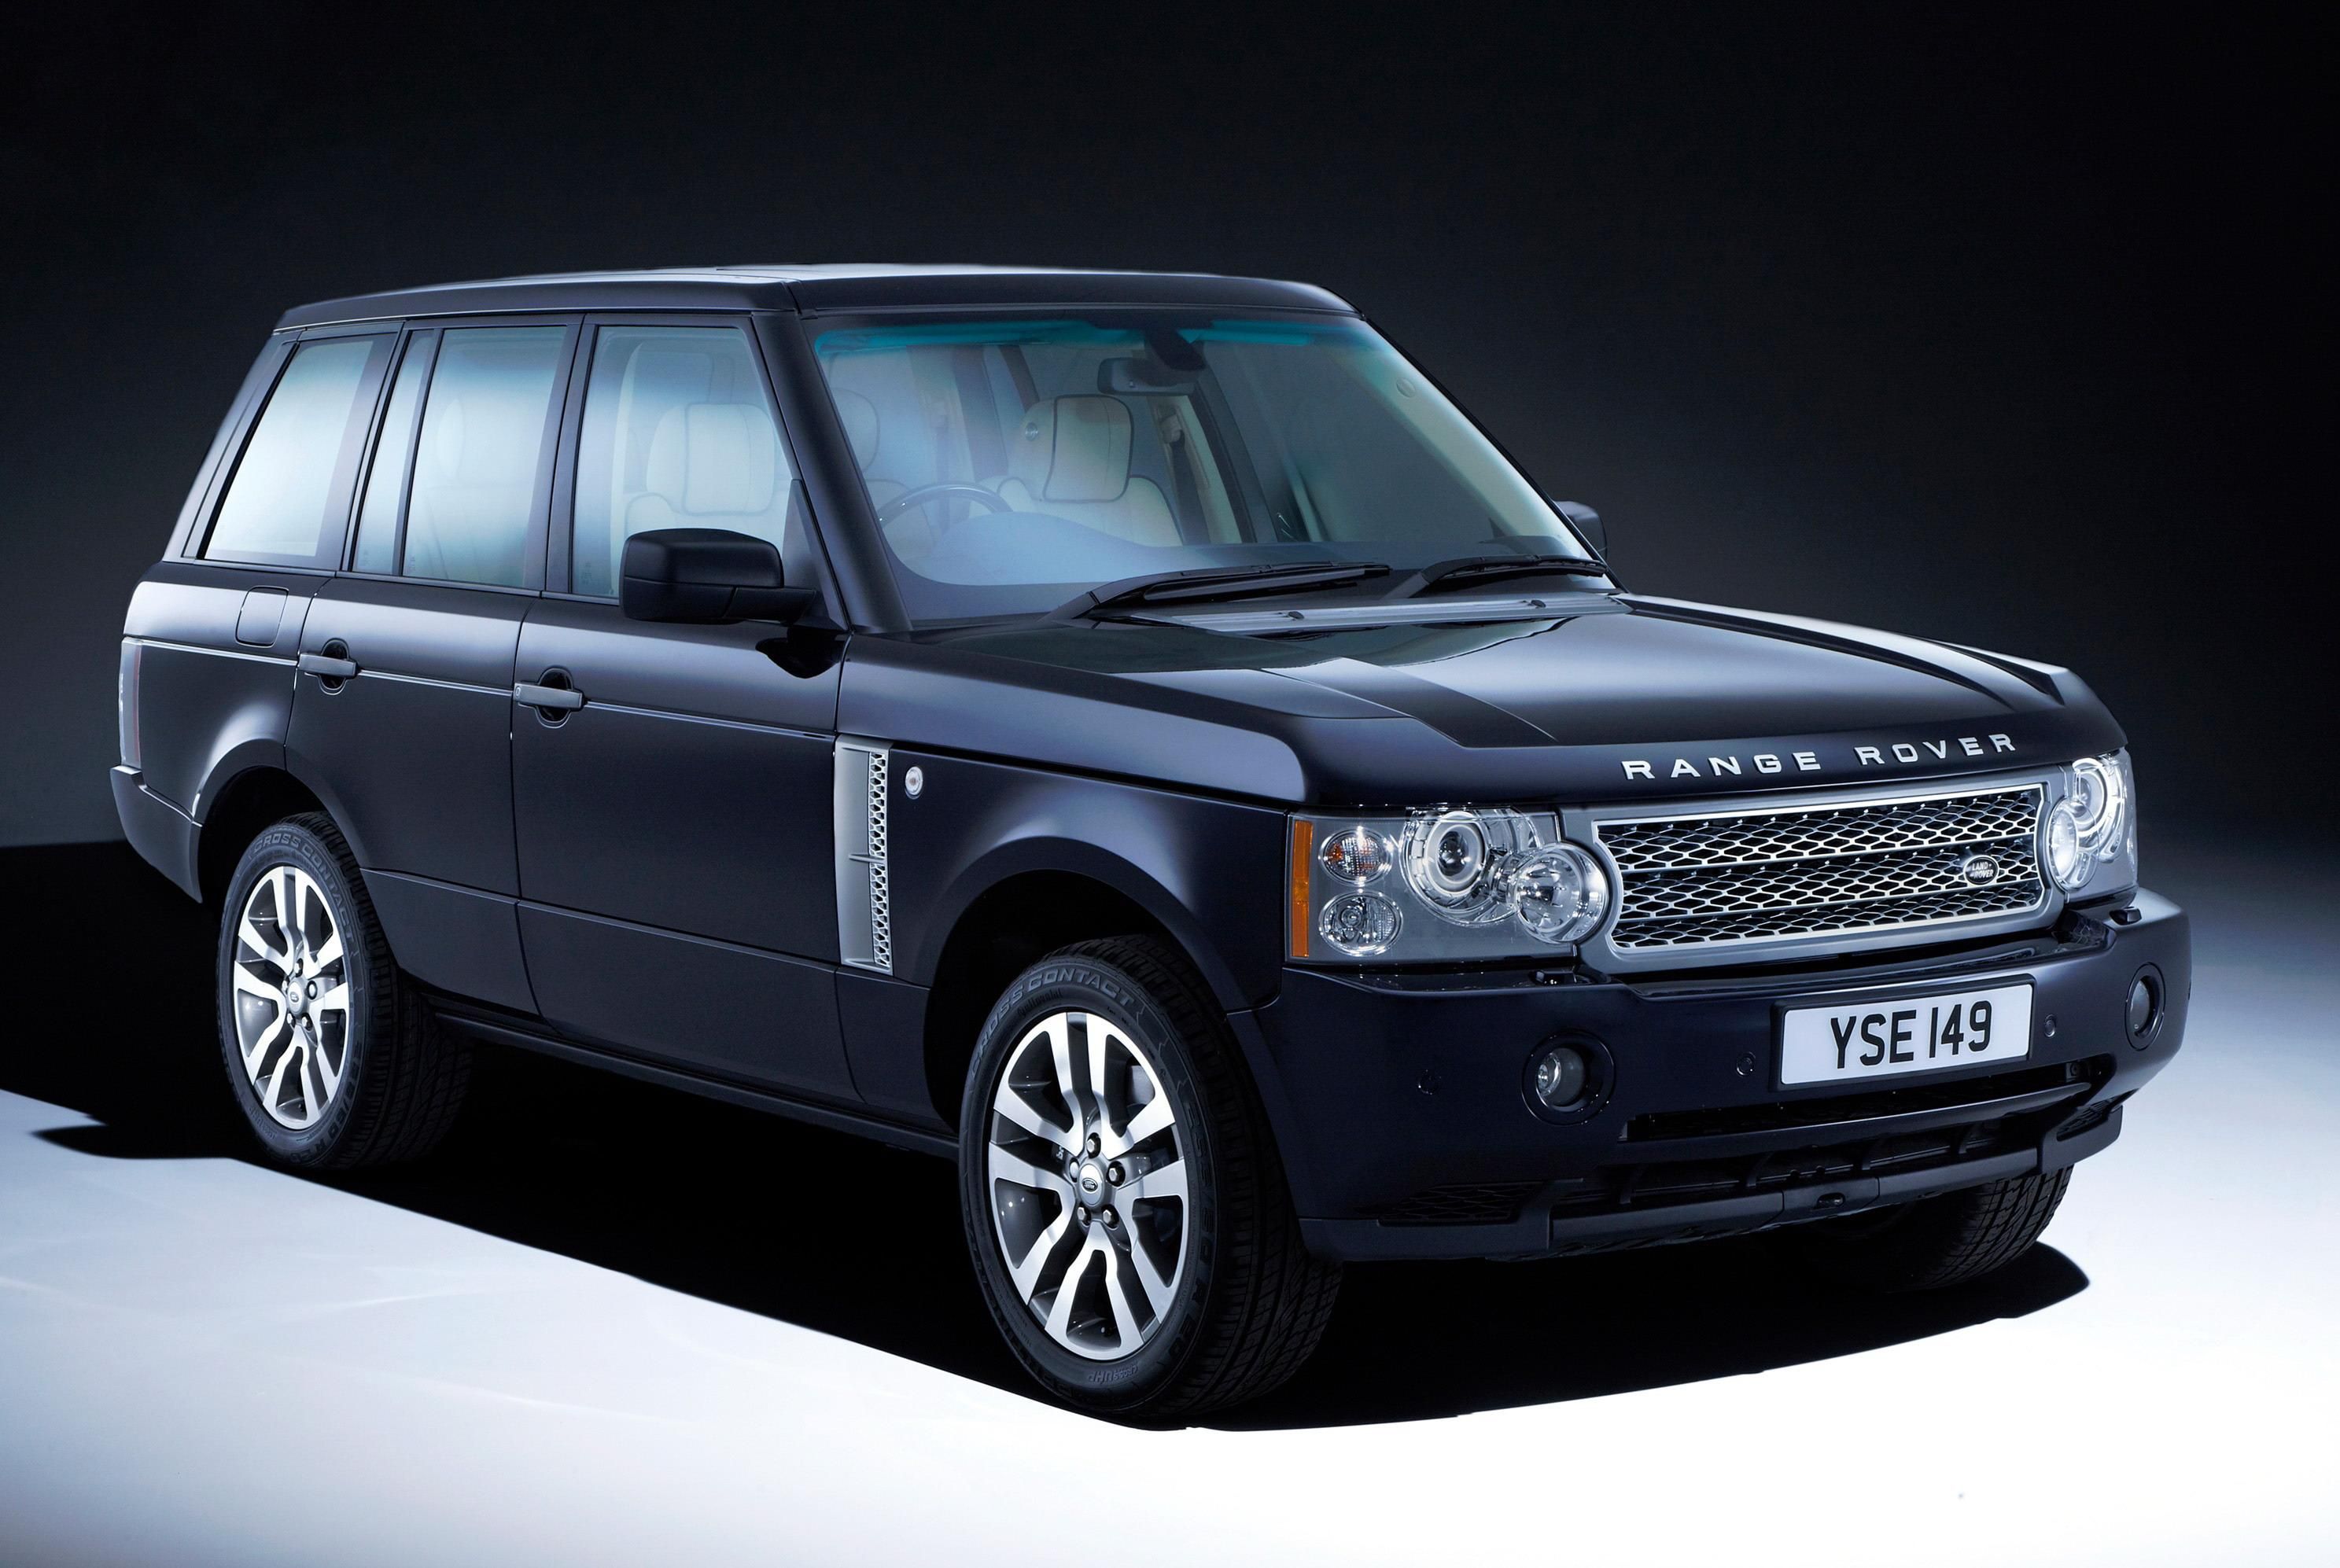 2009 Range Rover Westminster Limited Edition